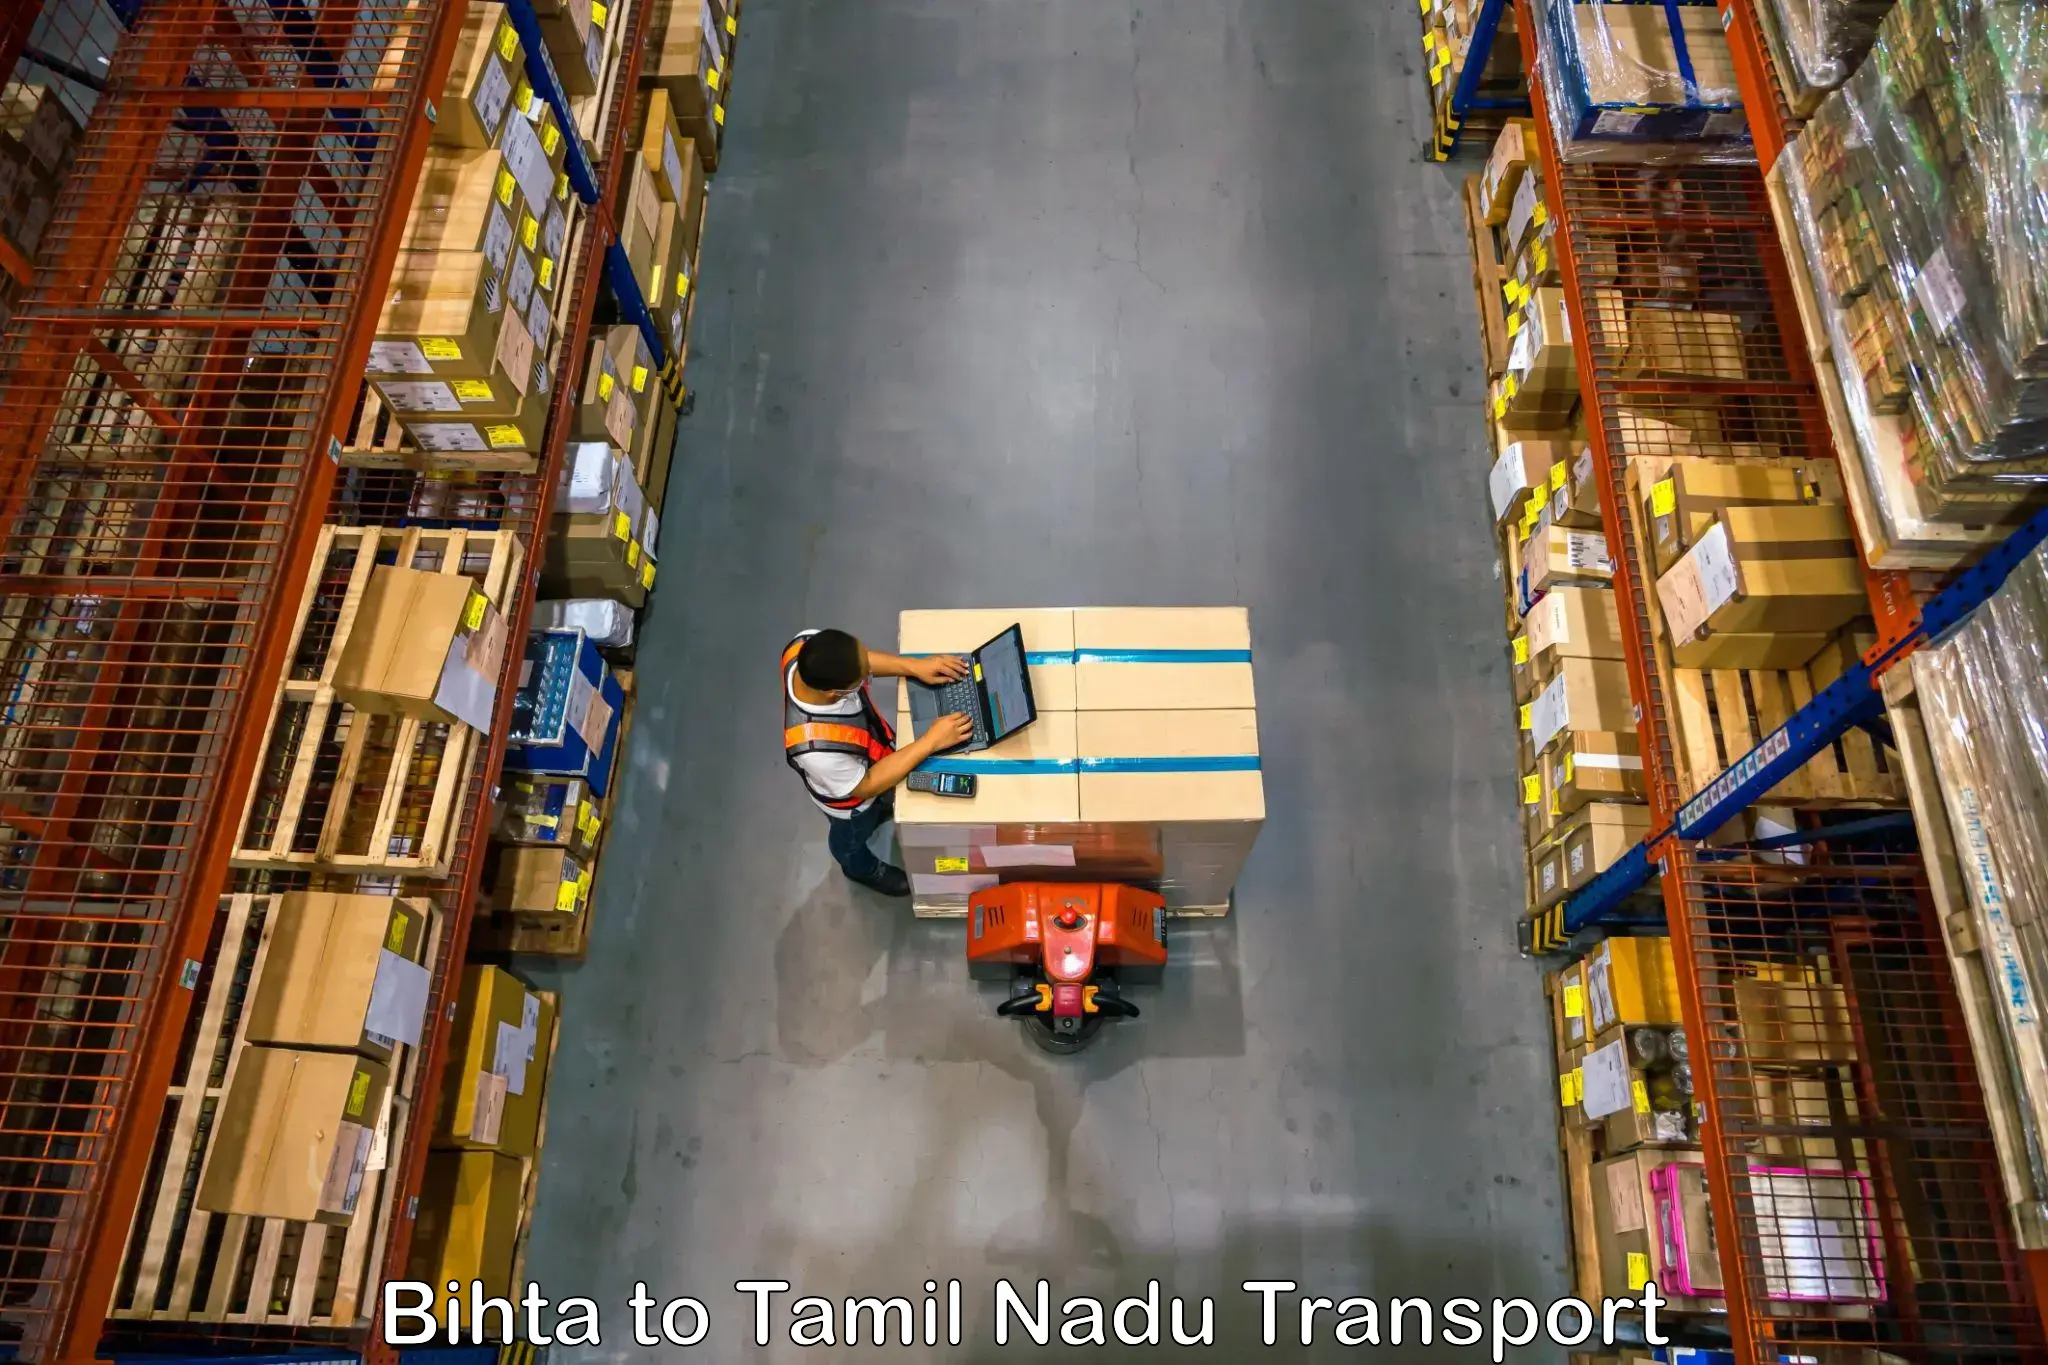 Land transport services Bihta to Meenakshi Academy of Higher Education and Research Chennai